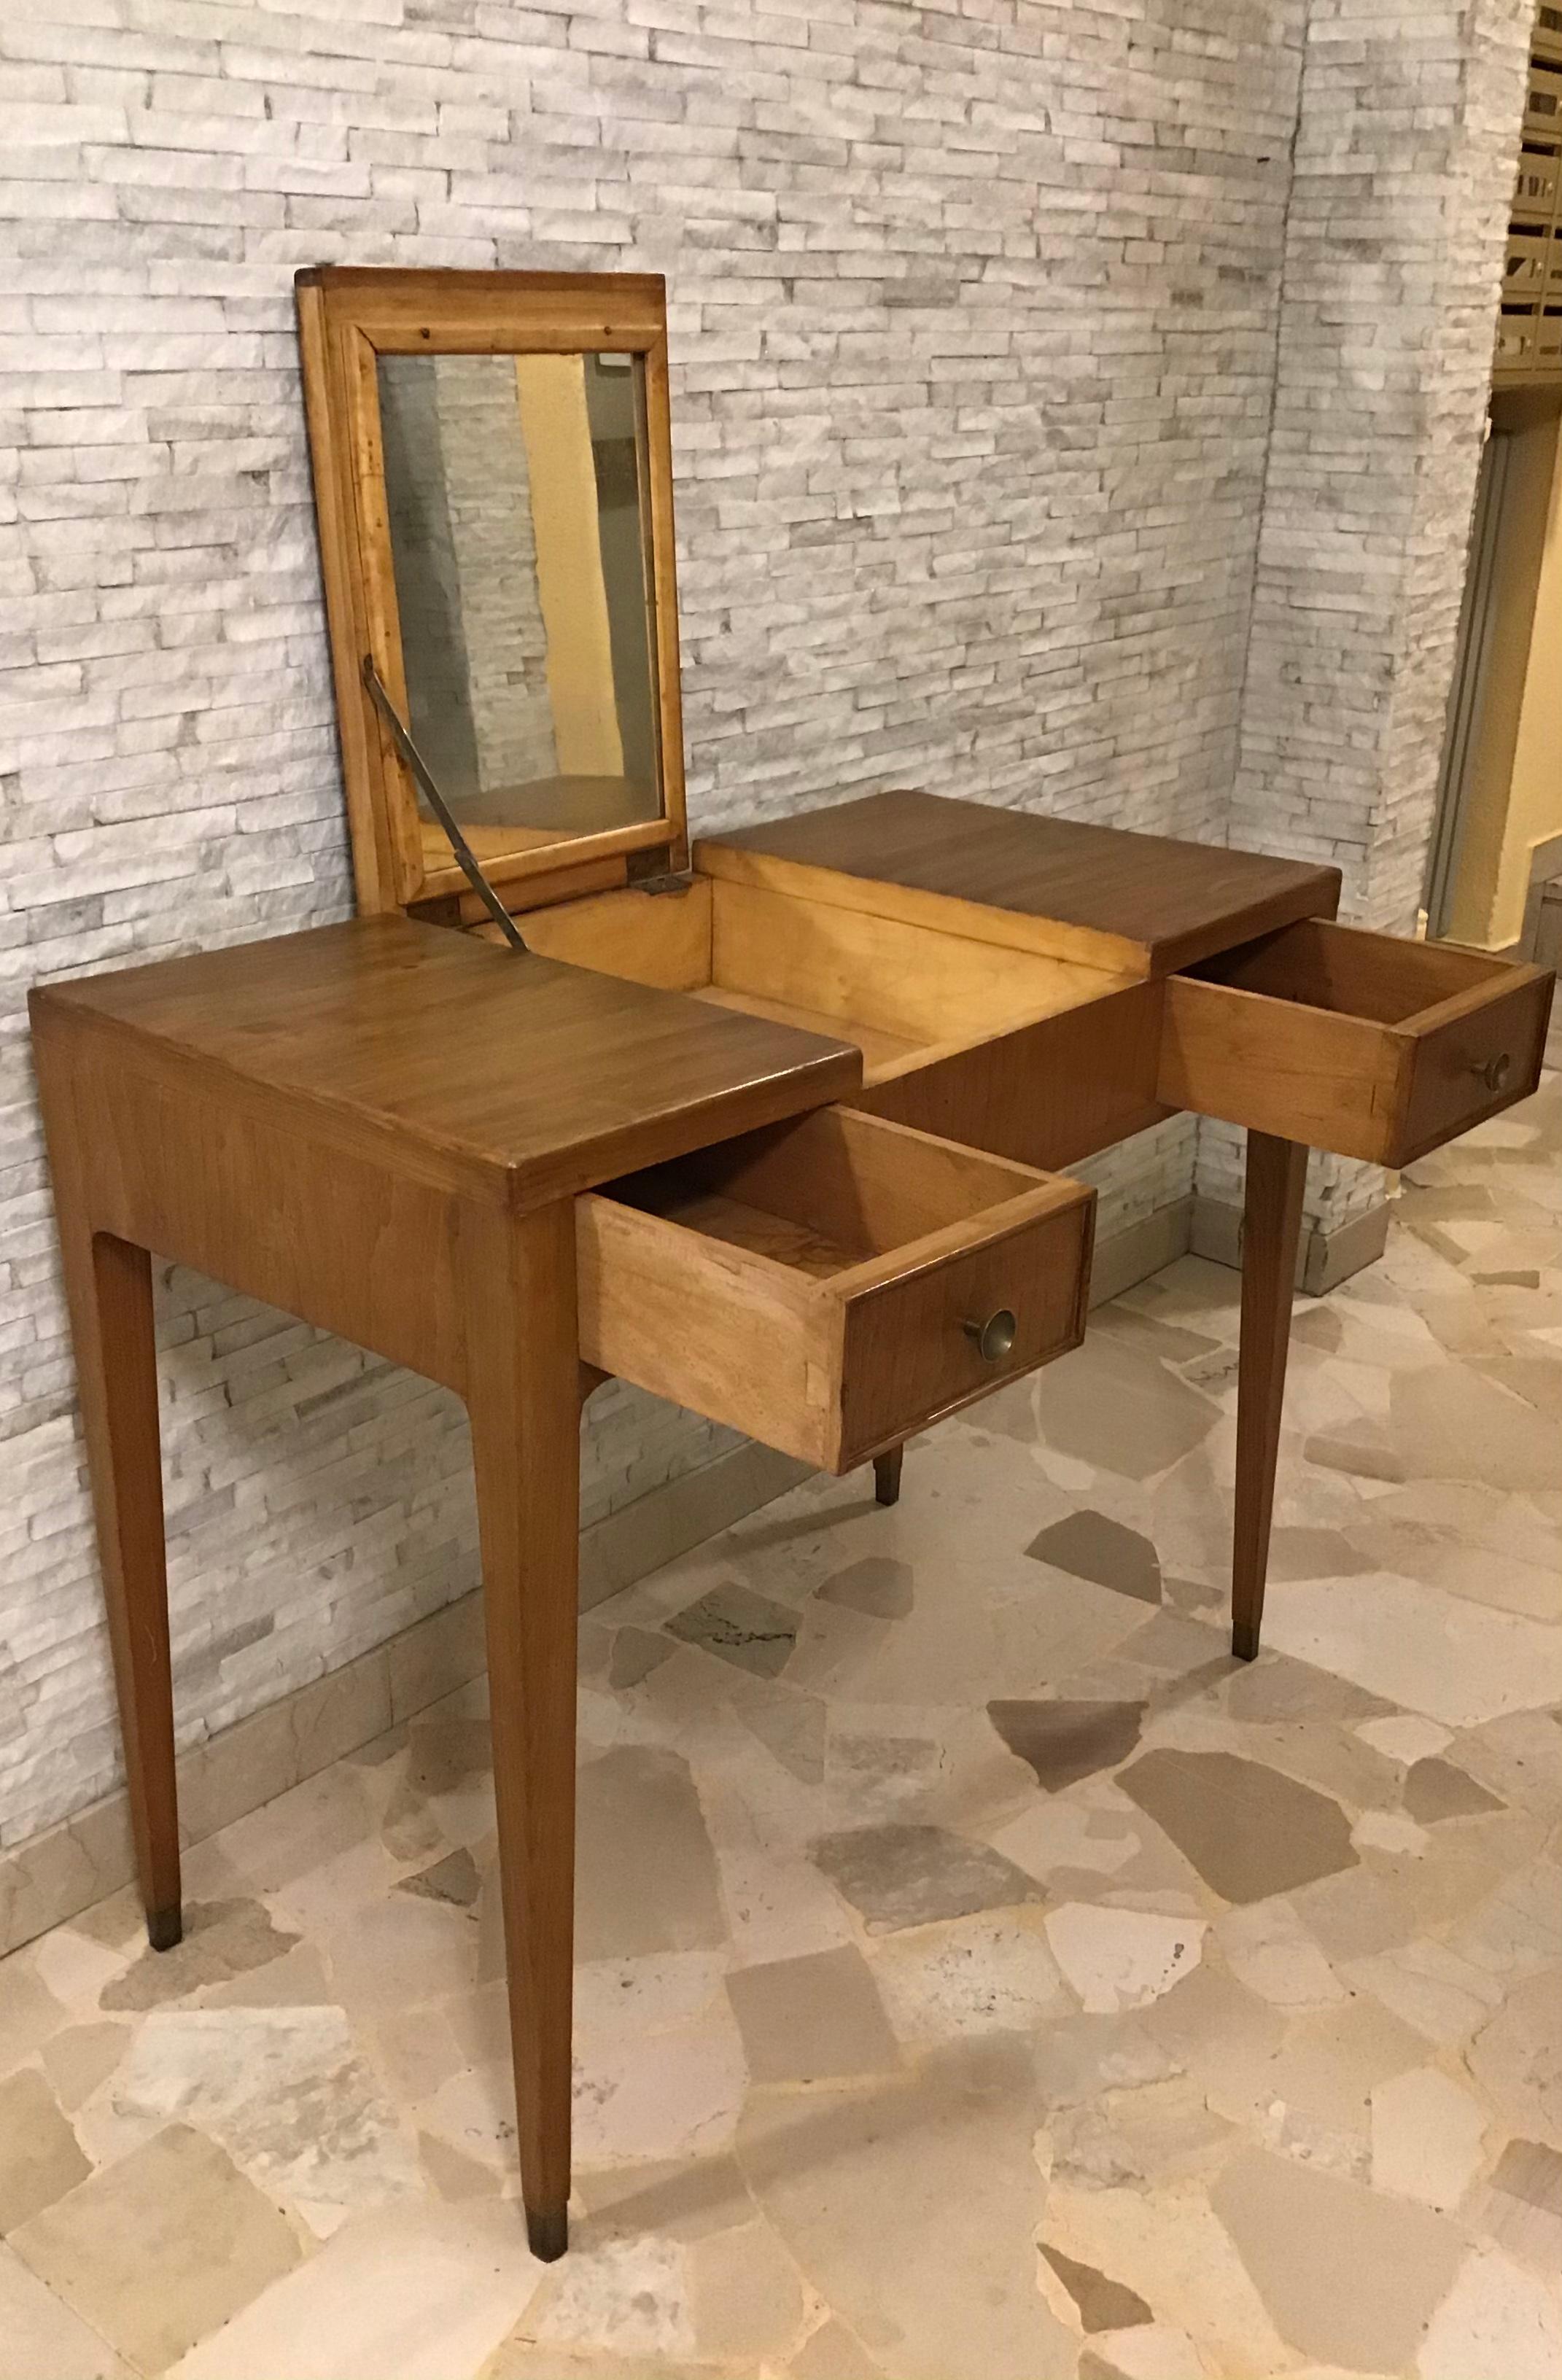 Gio’ Ponti “Style” Toilet /Desk Wood Brass, 1950, Italy For Sale 6